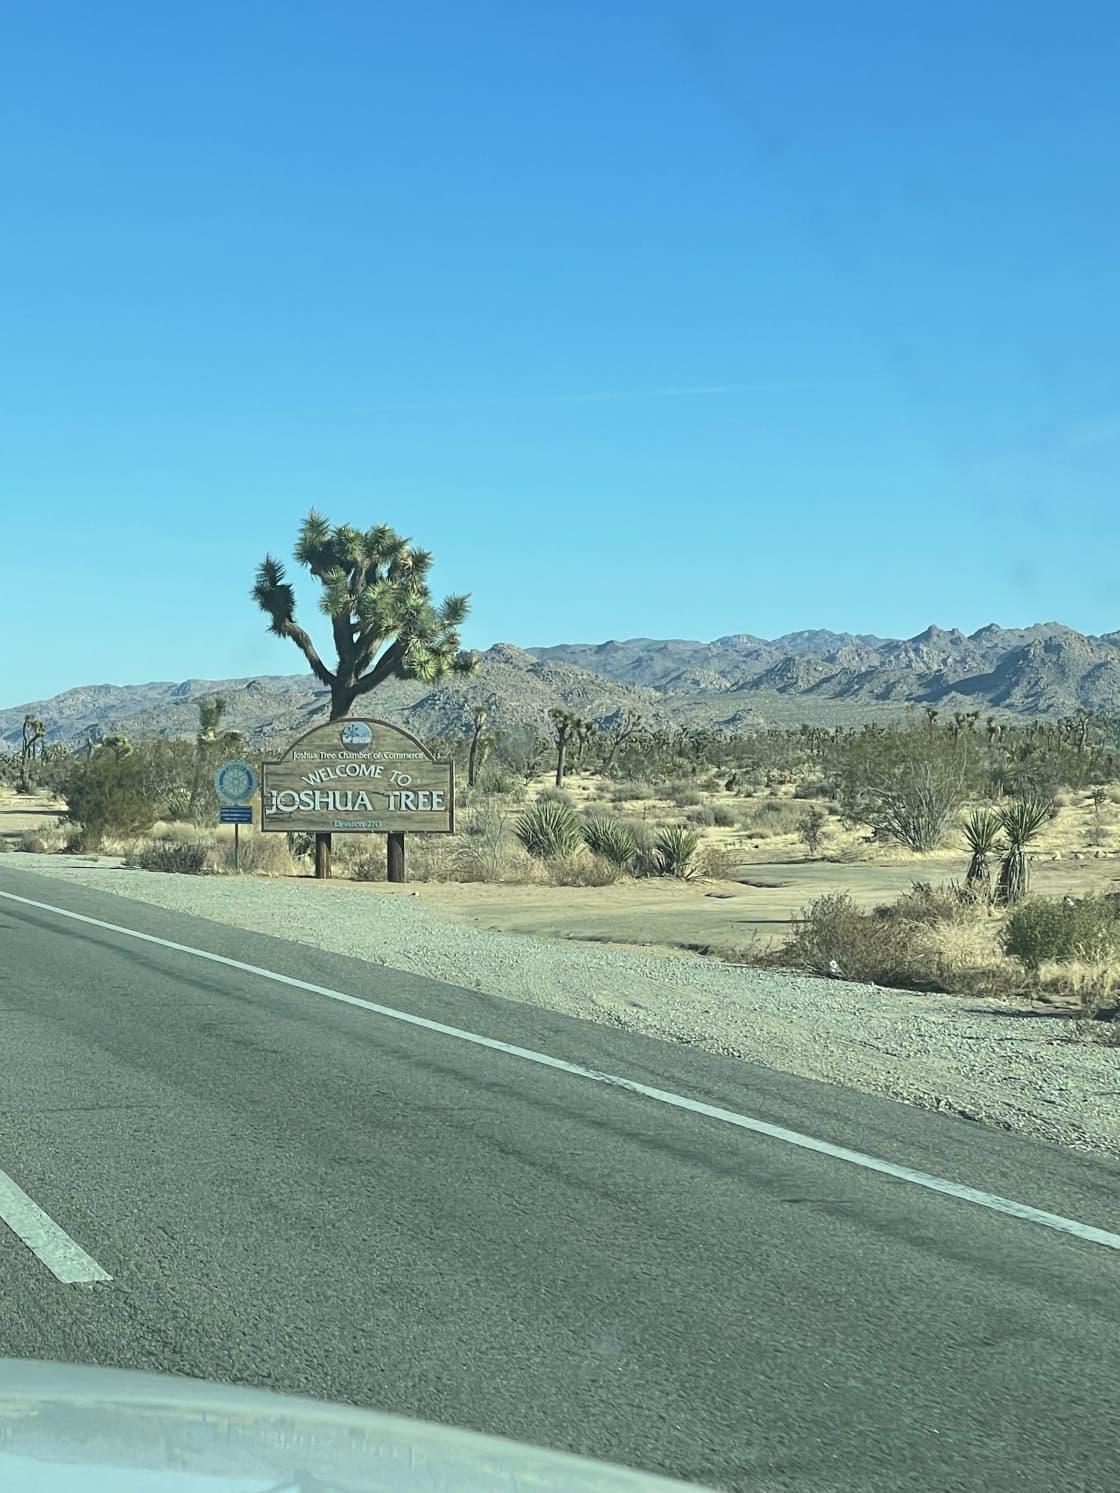 About 10 minutes from town of Joshua Trees